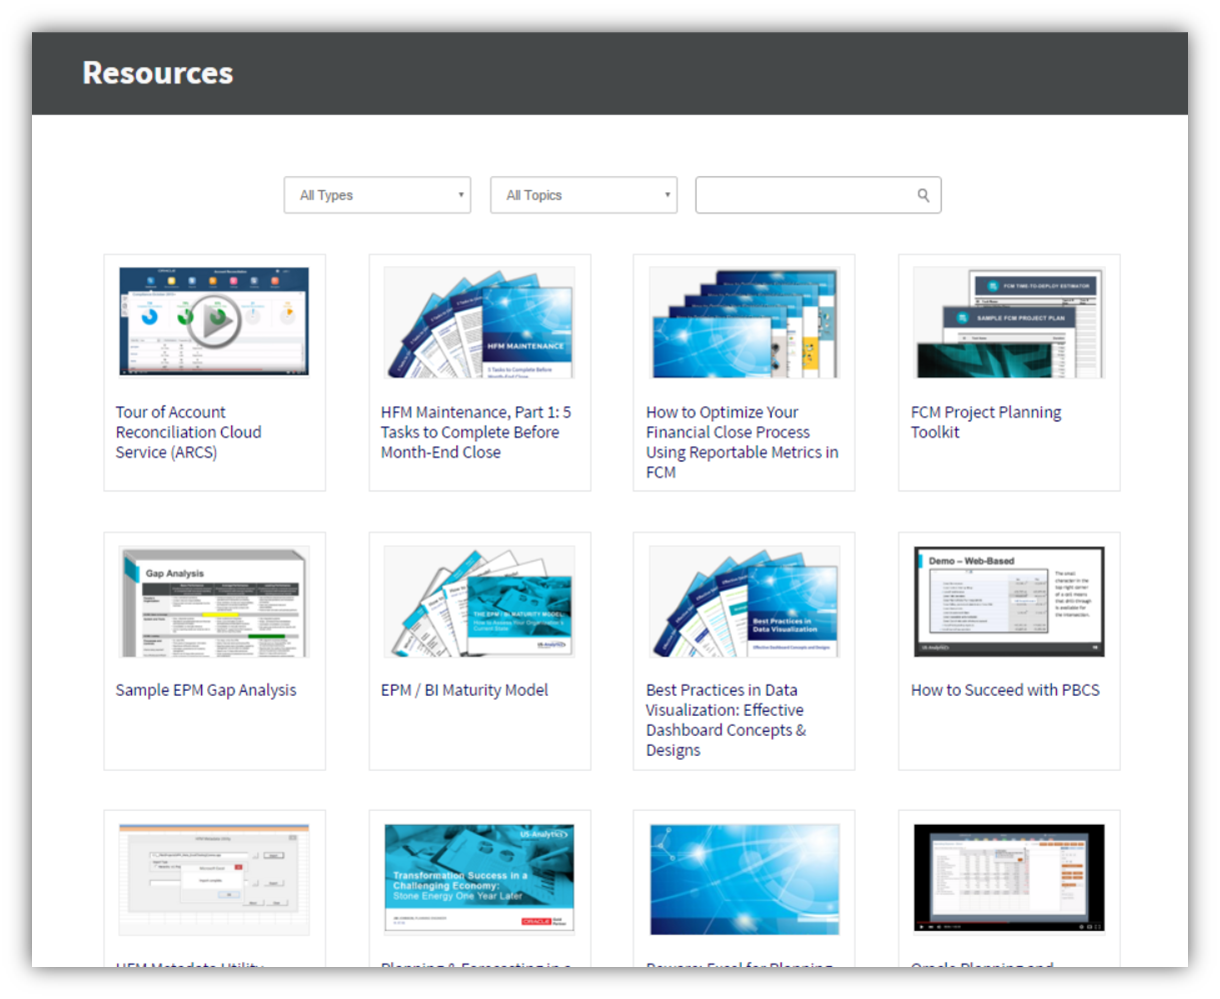 New Hyperion Resources Library: 70+ Videos, White Papers, and More